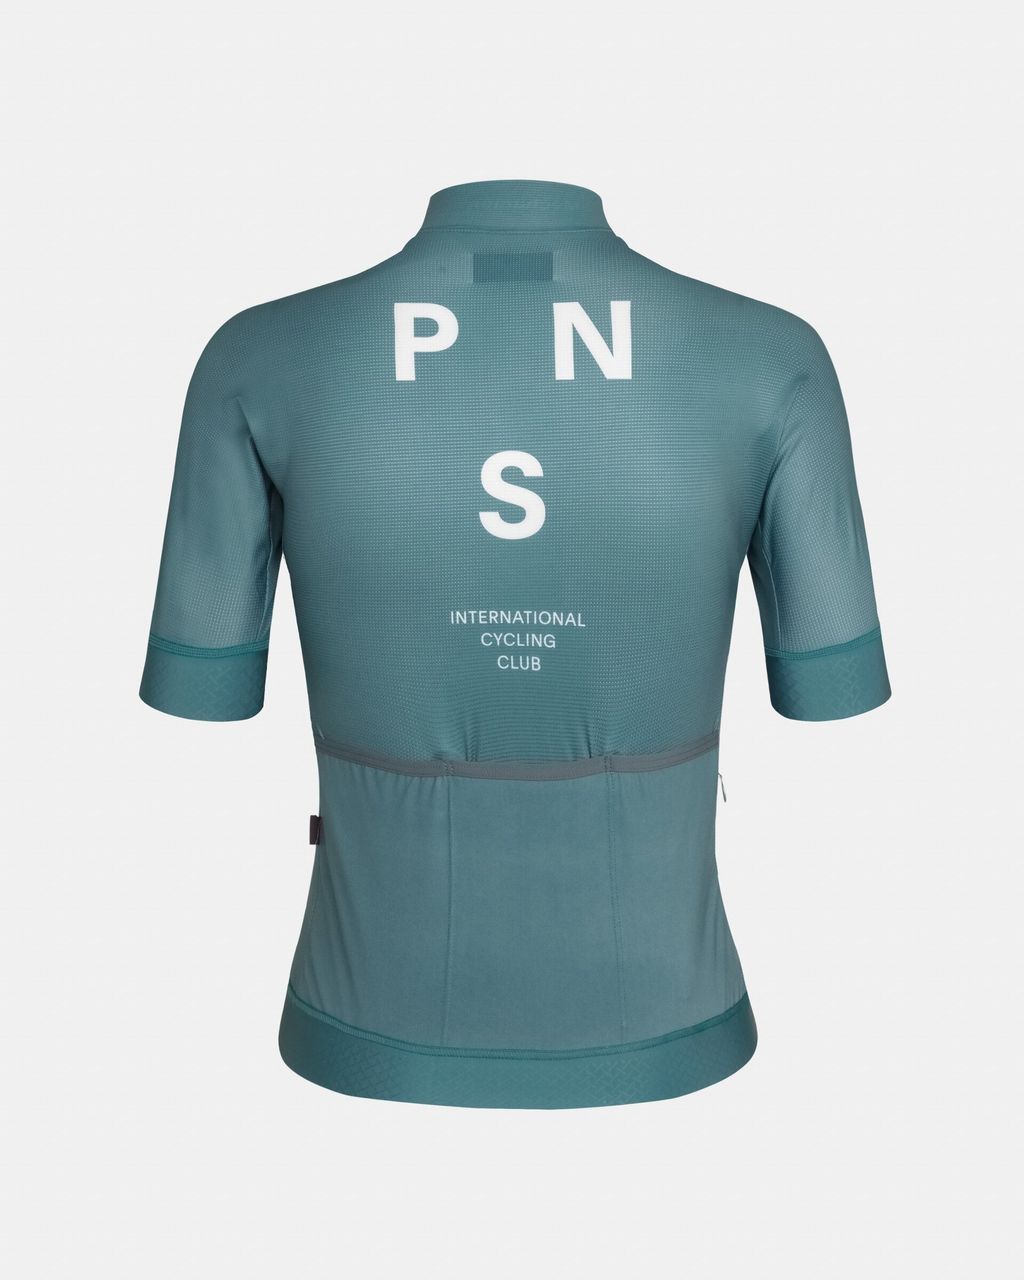 Womens-Mechanism-Jersey-Dusty-Teal_Back-pdp-page